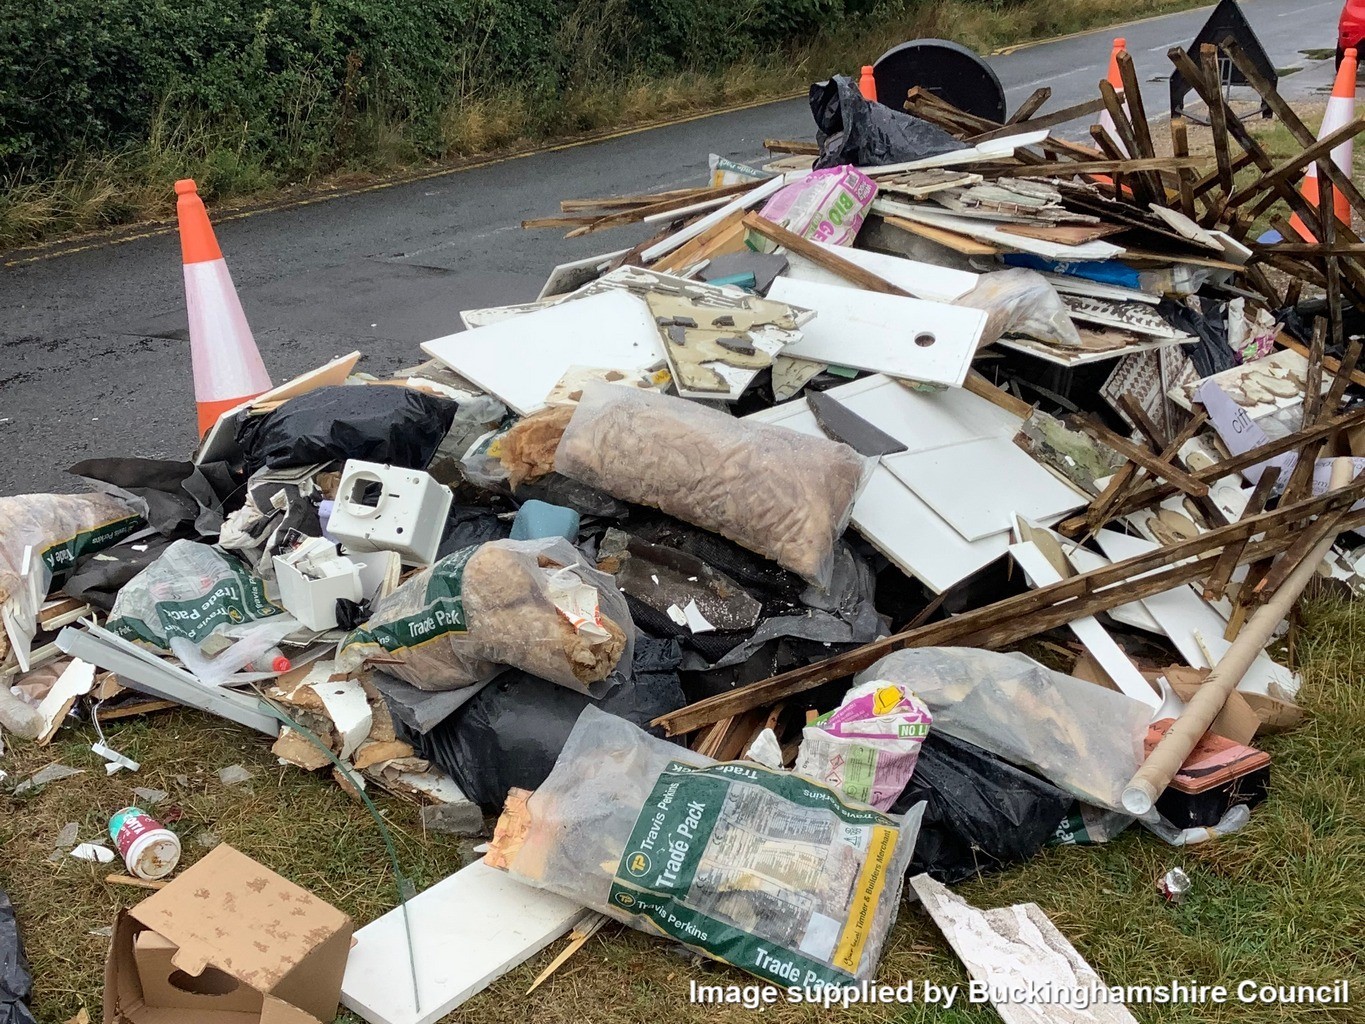 External-BC-2022-02-16-1215-Fly-tipping